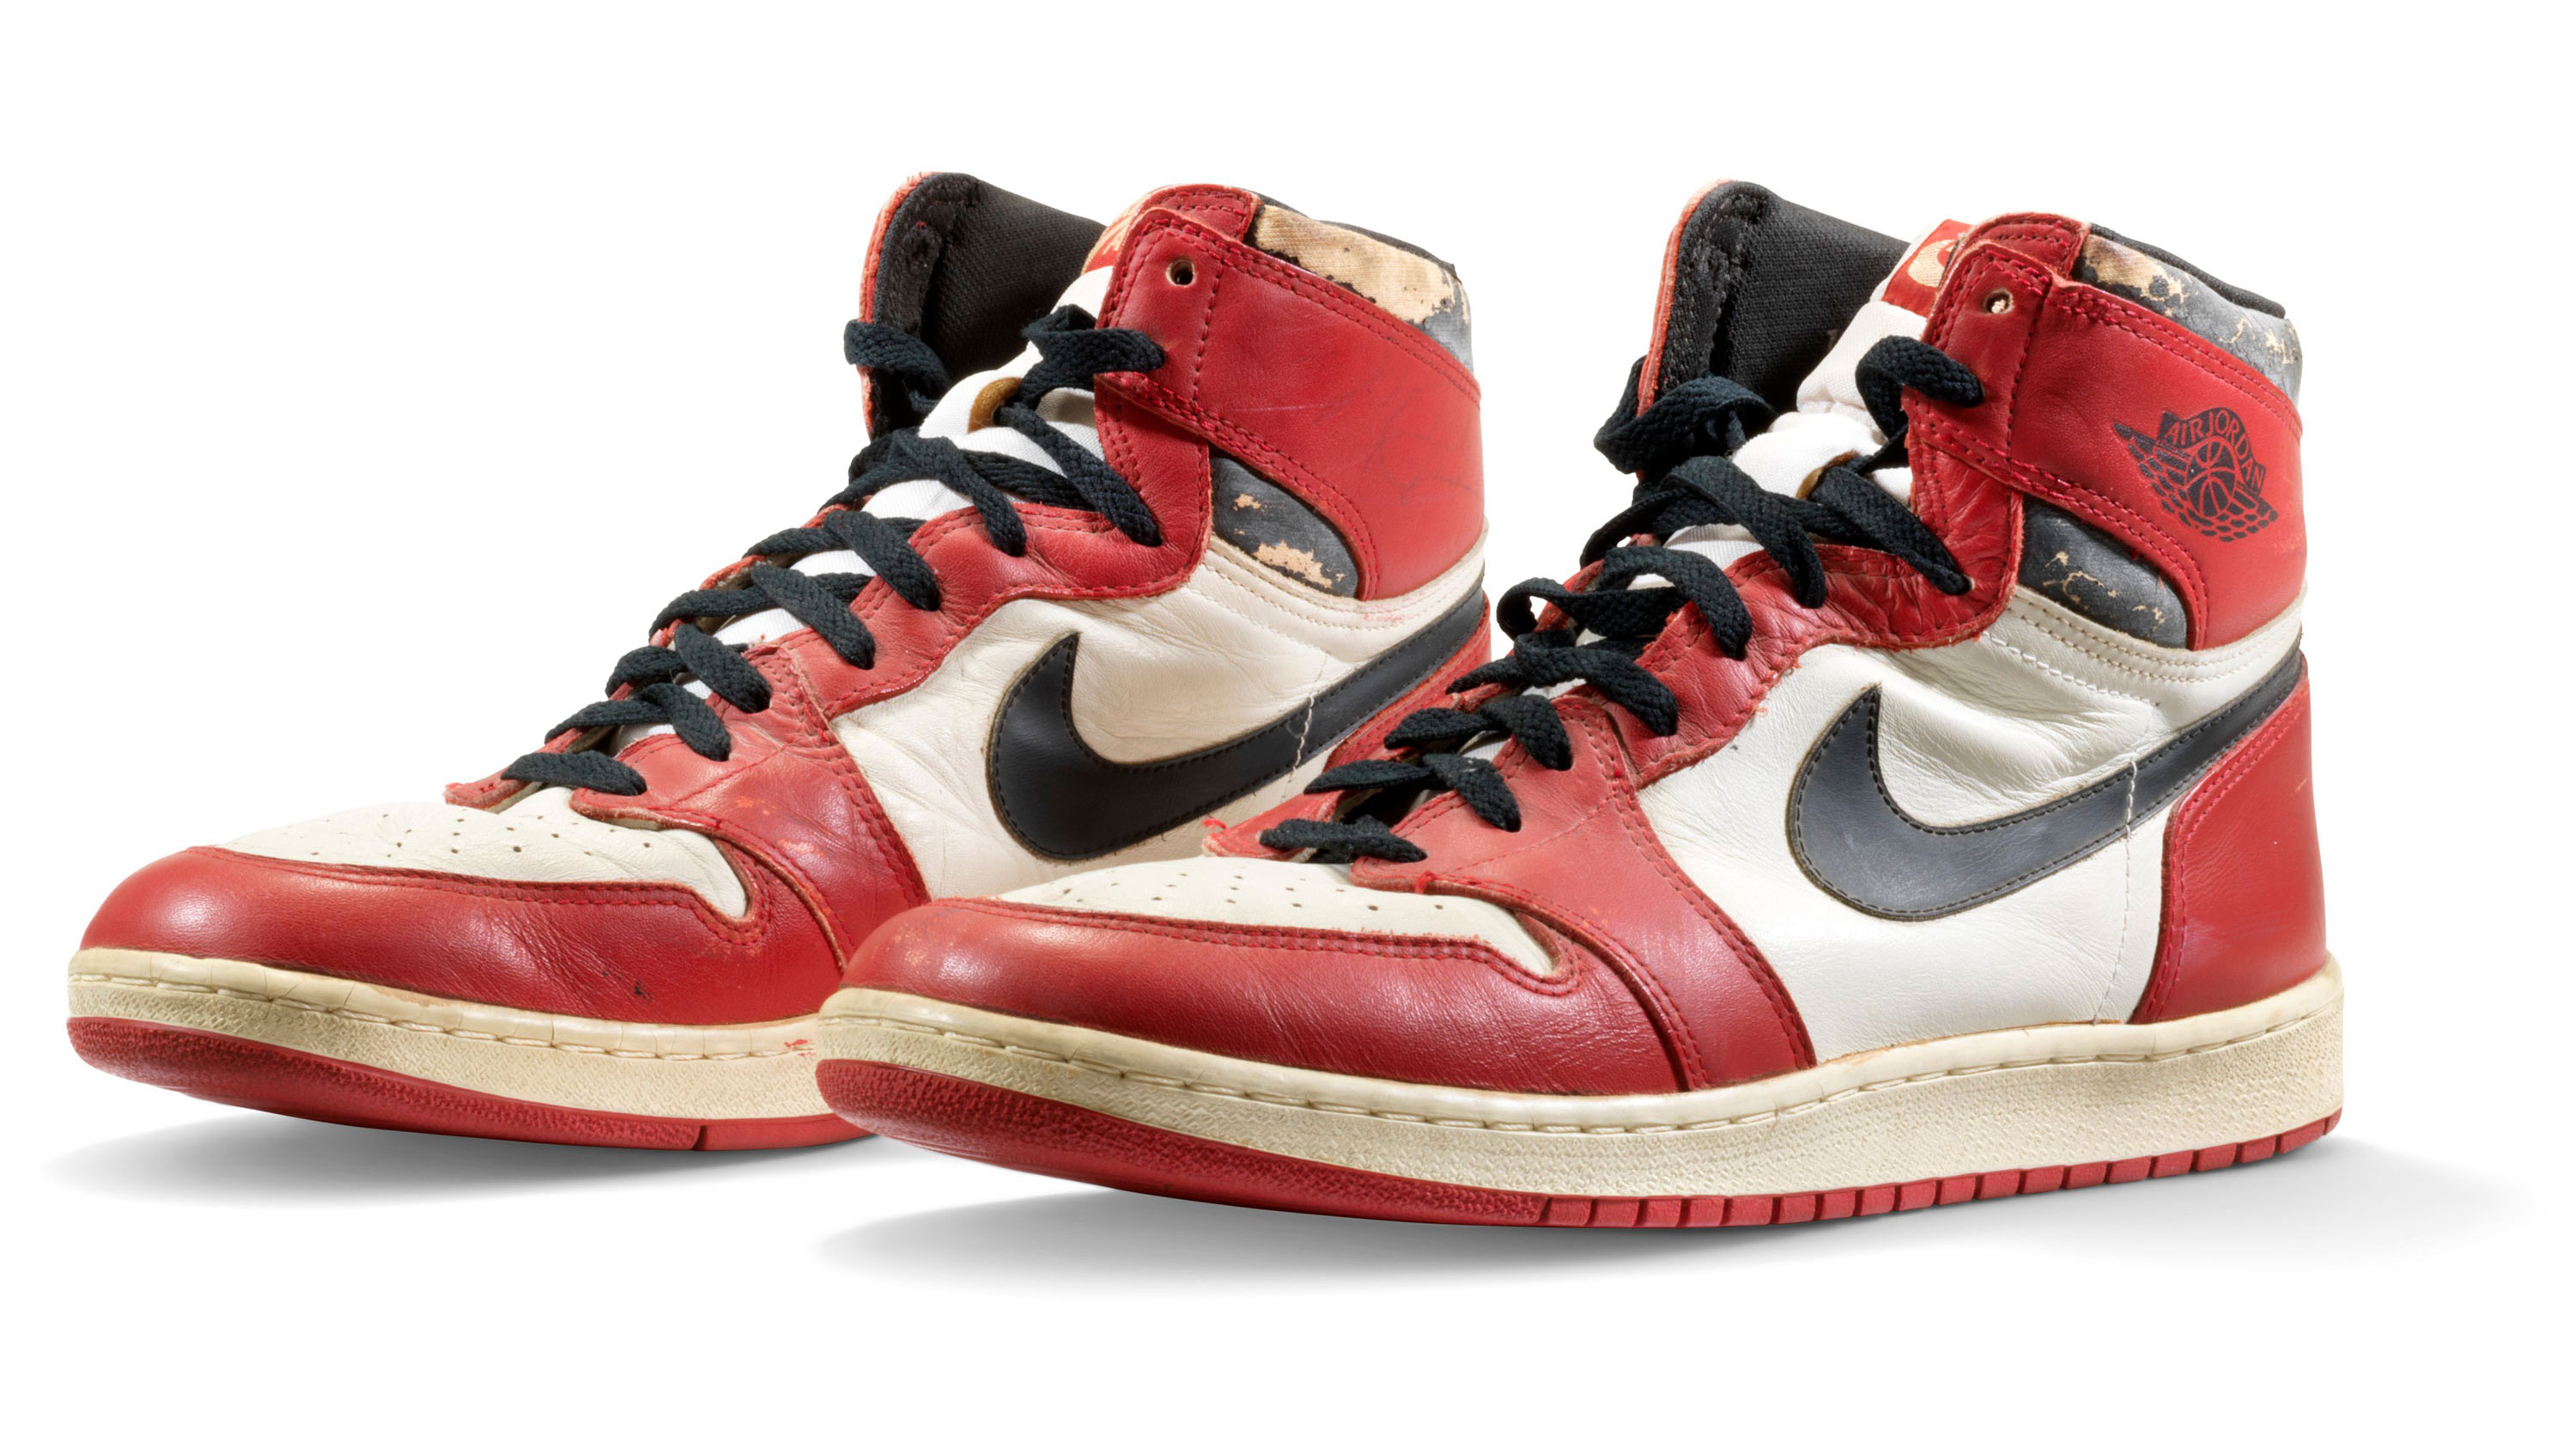 Michael Jordan's game-worn sneakers sell for a record $615,000 ...